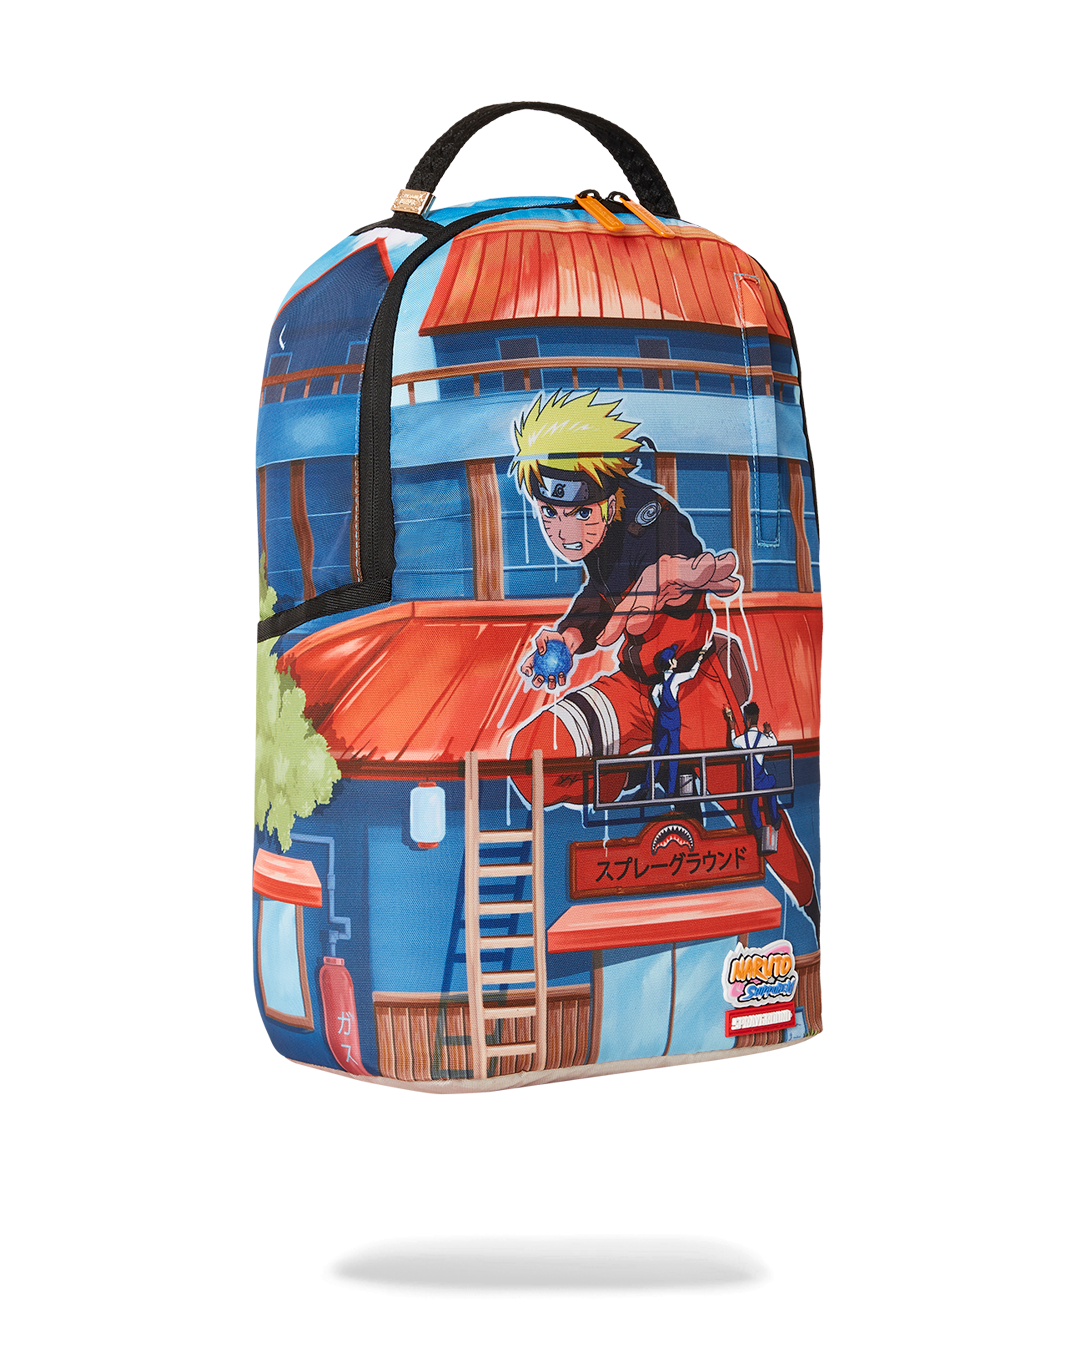 SPRAYGROUND Quality Backpack and Travel Bag Review